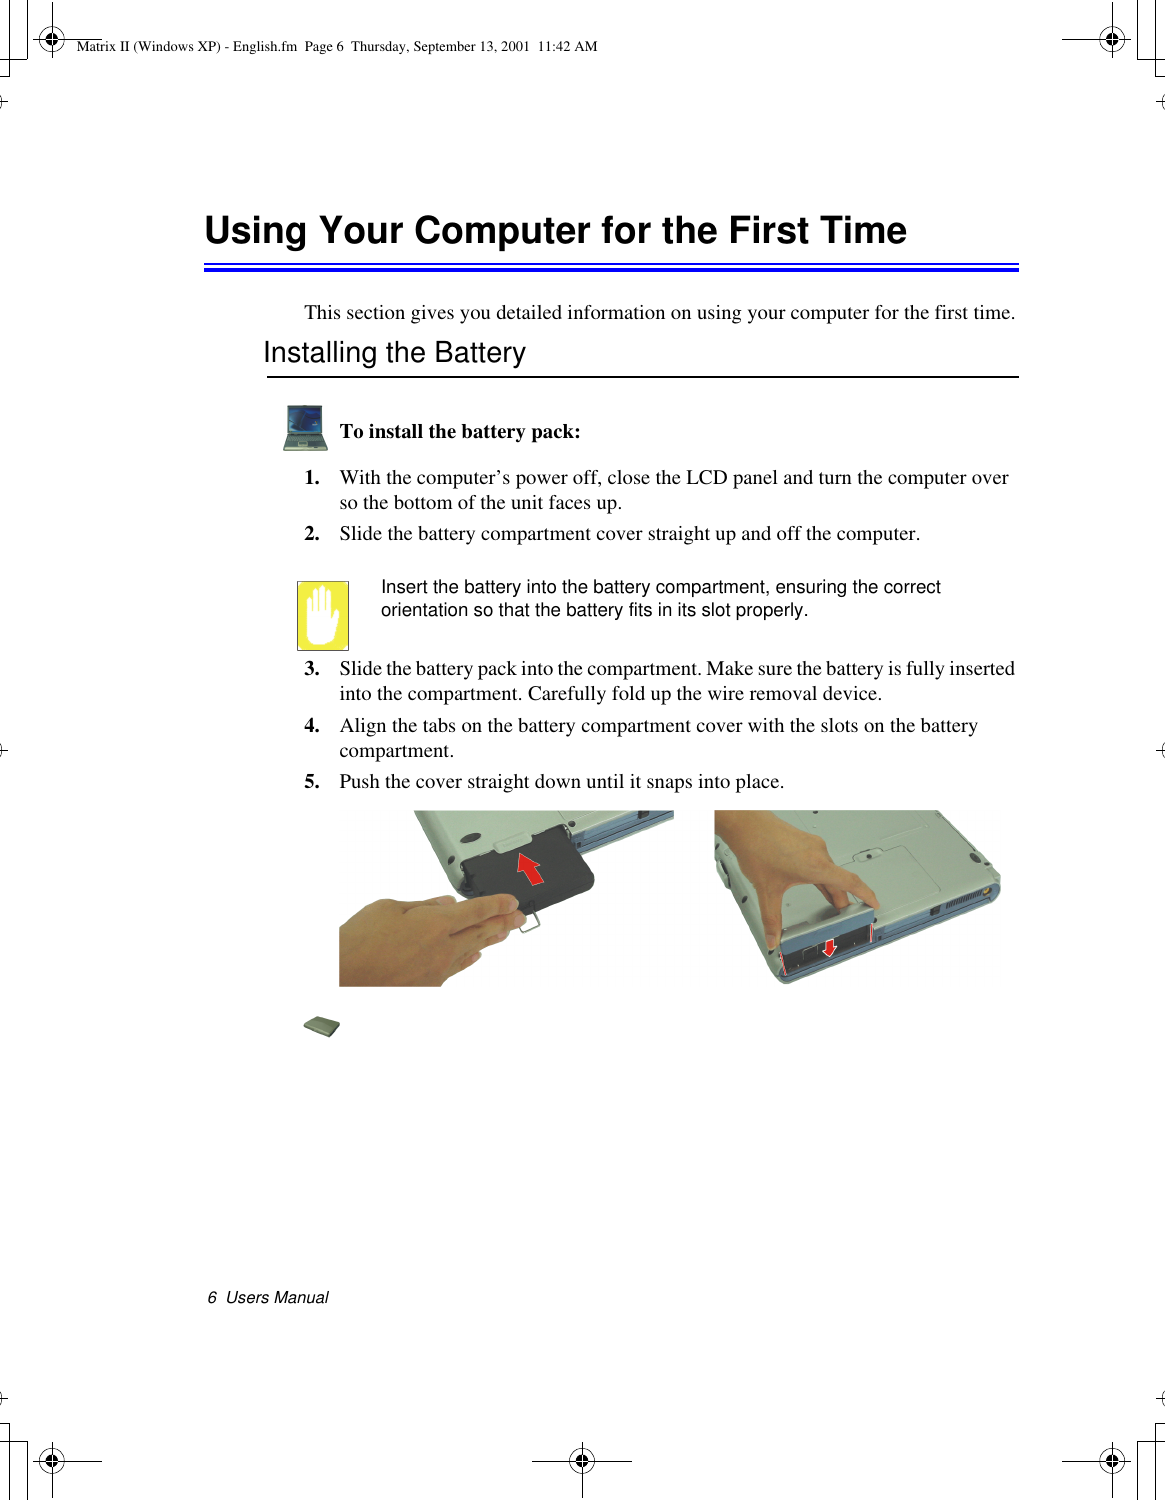 6  Users ManualUsing Your Computer for the First TimeThis section gives you detailed information on using your computer for the first time.Installing the BatteryTo install the battery pack:1. With the computer’s power off, close the LCD panel and turn the computer over so the bottom of the unit faces up.2. Slide the battery compartment cover straight up and off the computer.Insert the battery into the battery compartment, ensuring the correct orientation so that the battery fits in its slot properly. 3. Slide the battery pack into the compartment. Make sure the battery is fully inserted into the compartment. Carefully fold up the wire removal device.4. Align the tabs on the battery compartment cover with the slots on the battery compartment.5. Push the cover straight down until it snaps into place. Matrix II (Windows XP) - English.fm  Page 6  Thursday, September 13, 2001  11:42 AM